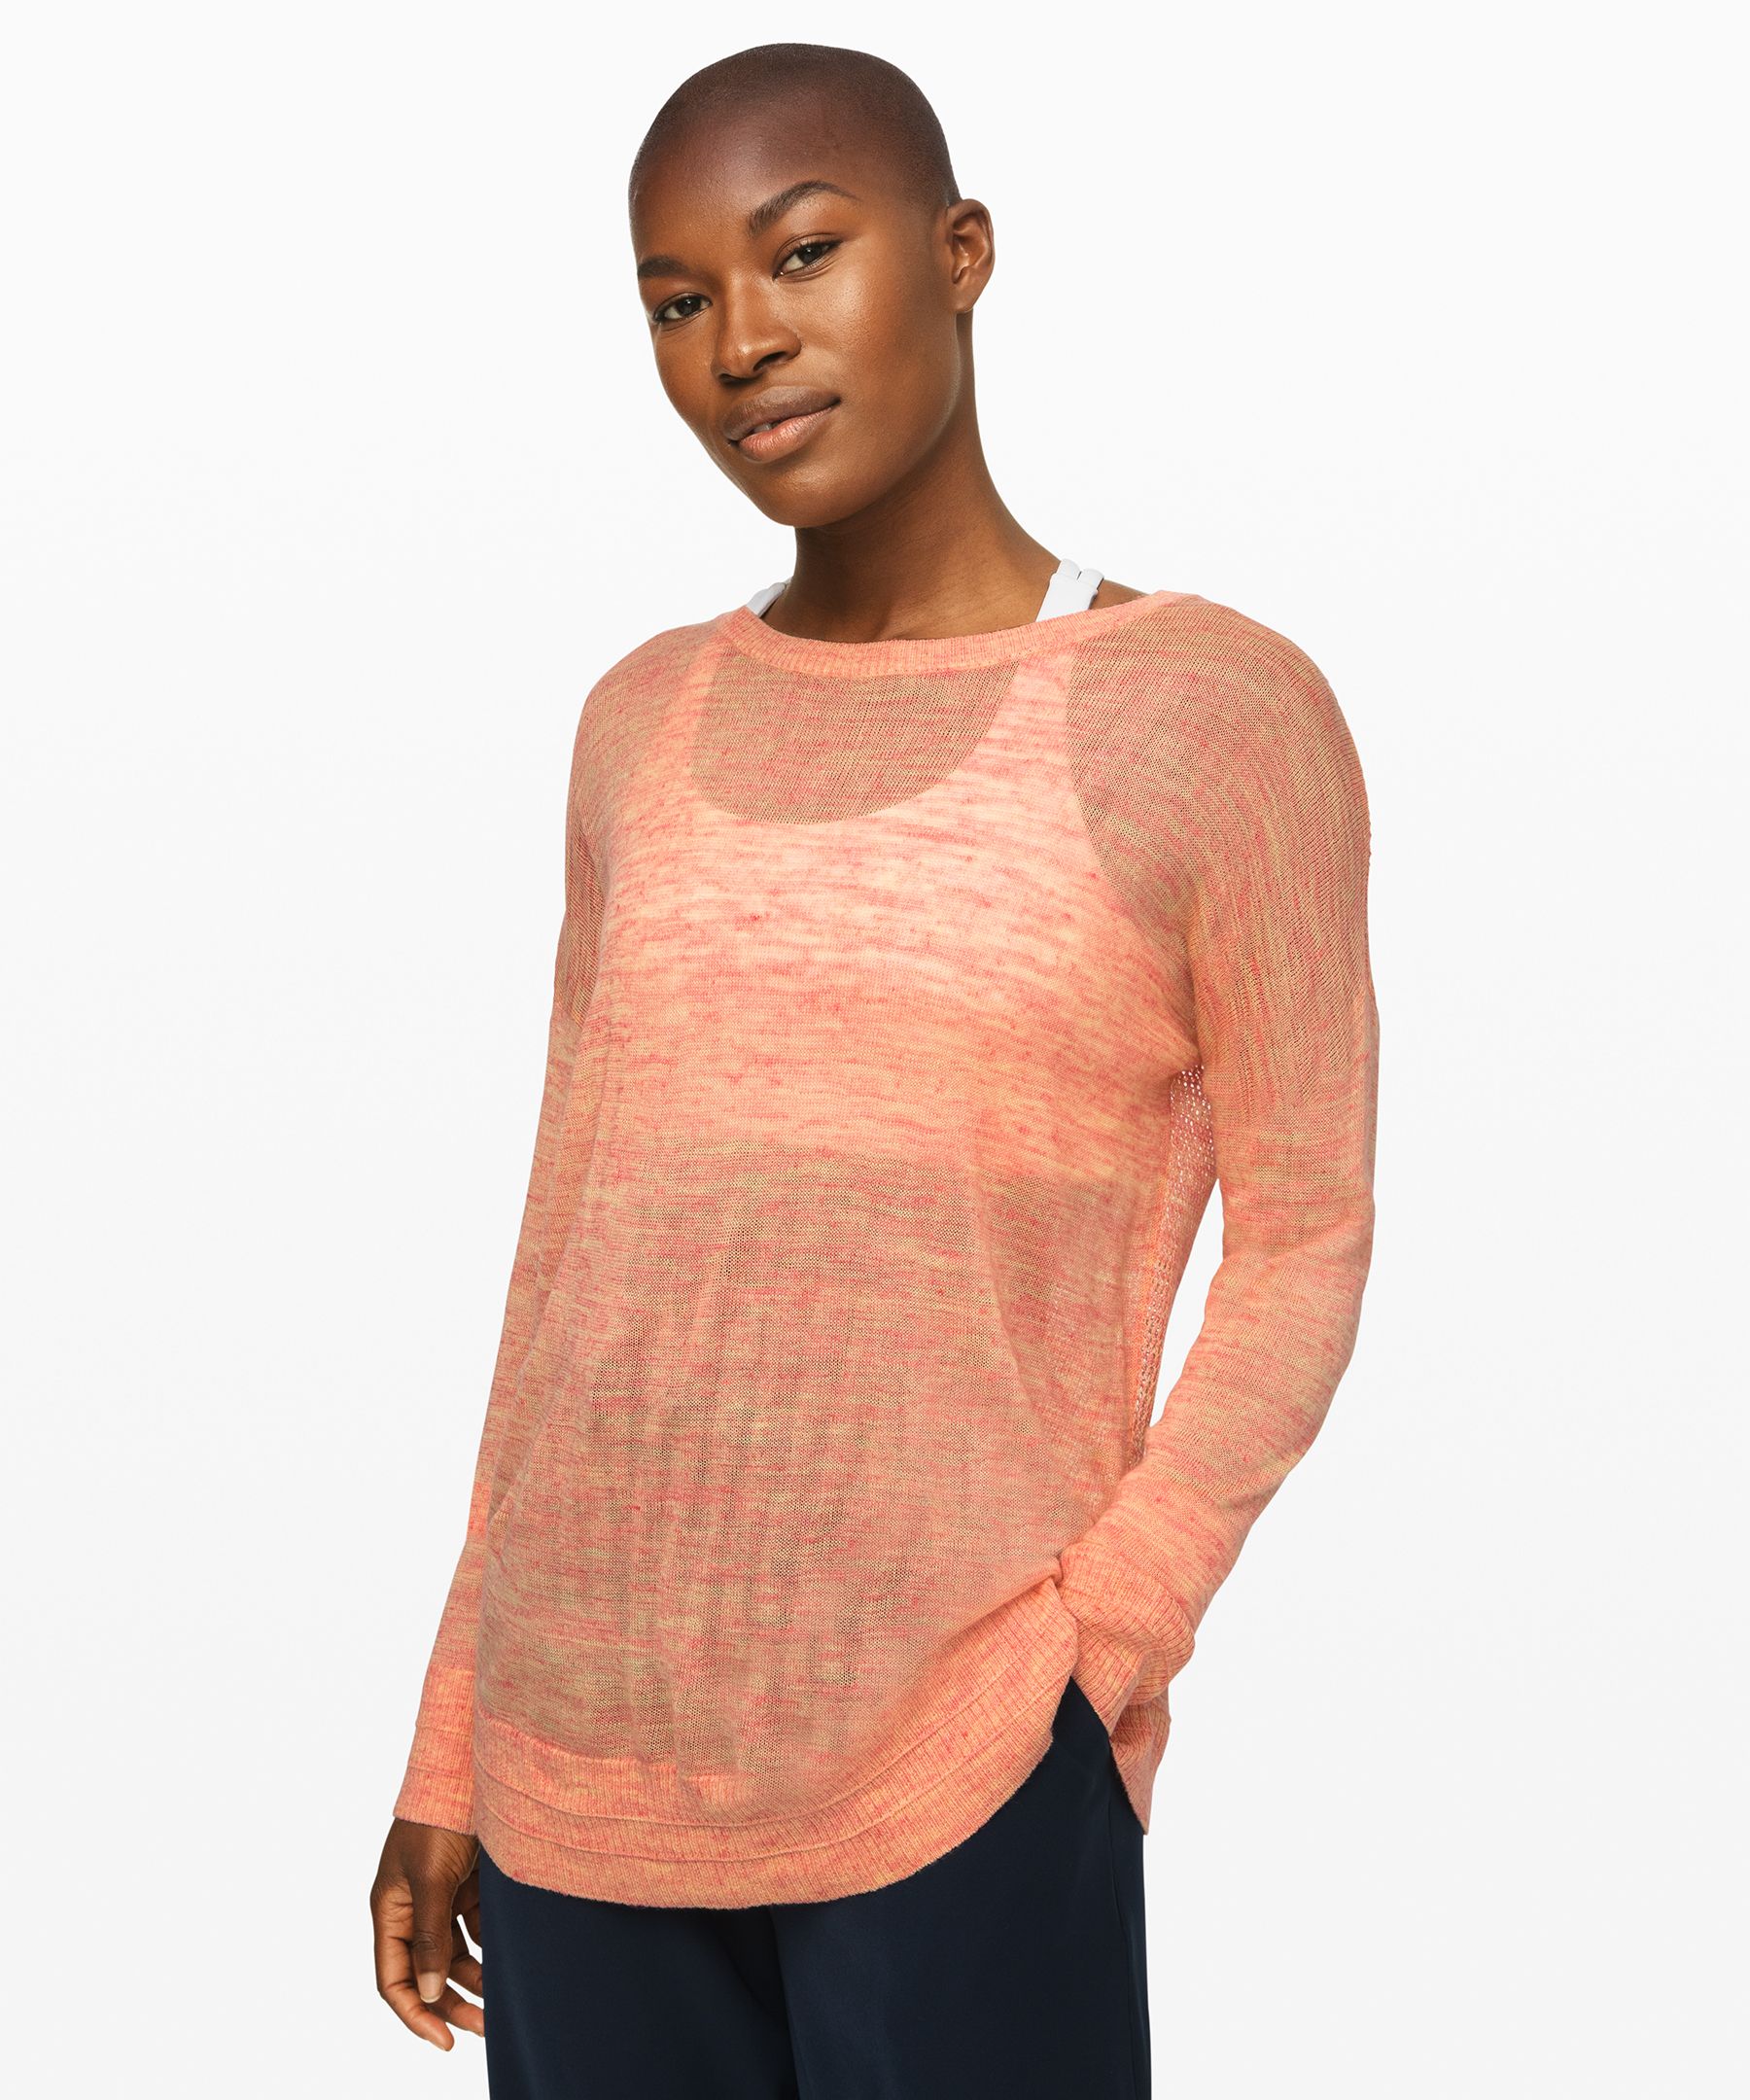 Lululemon Well Being Crew Sweater *linen In Heathered Speckle Coral Peach